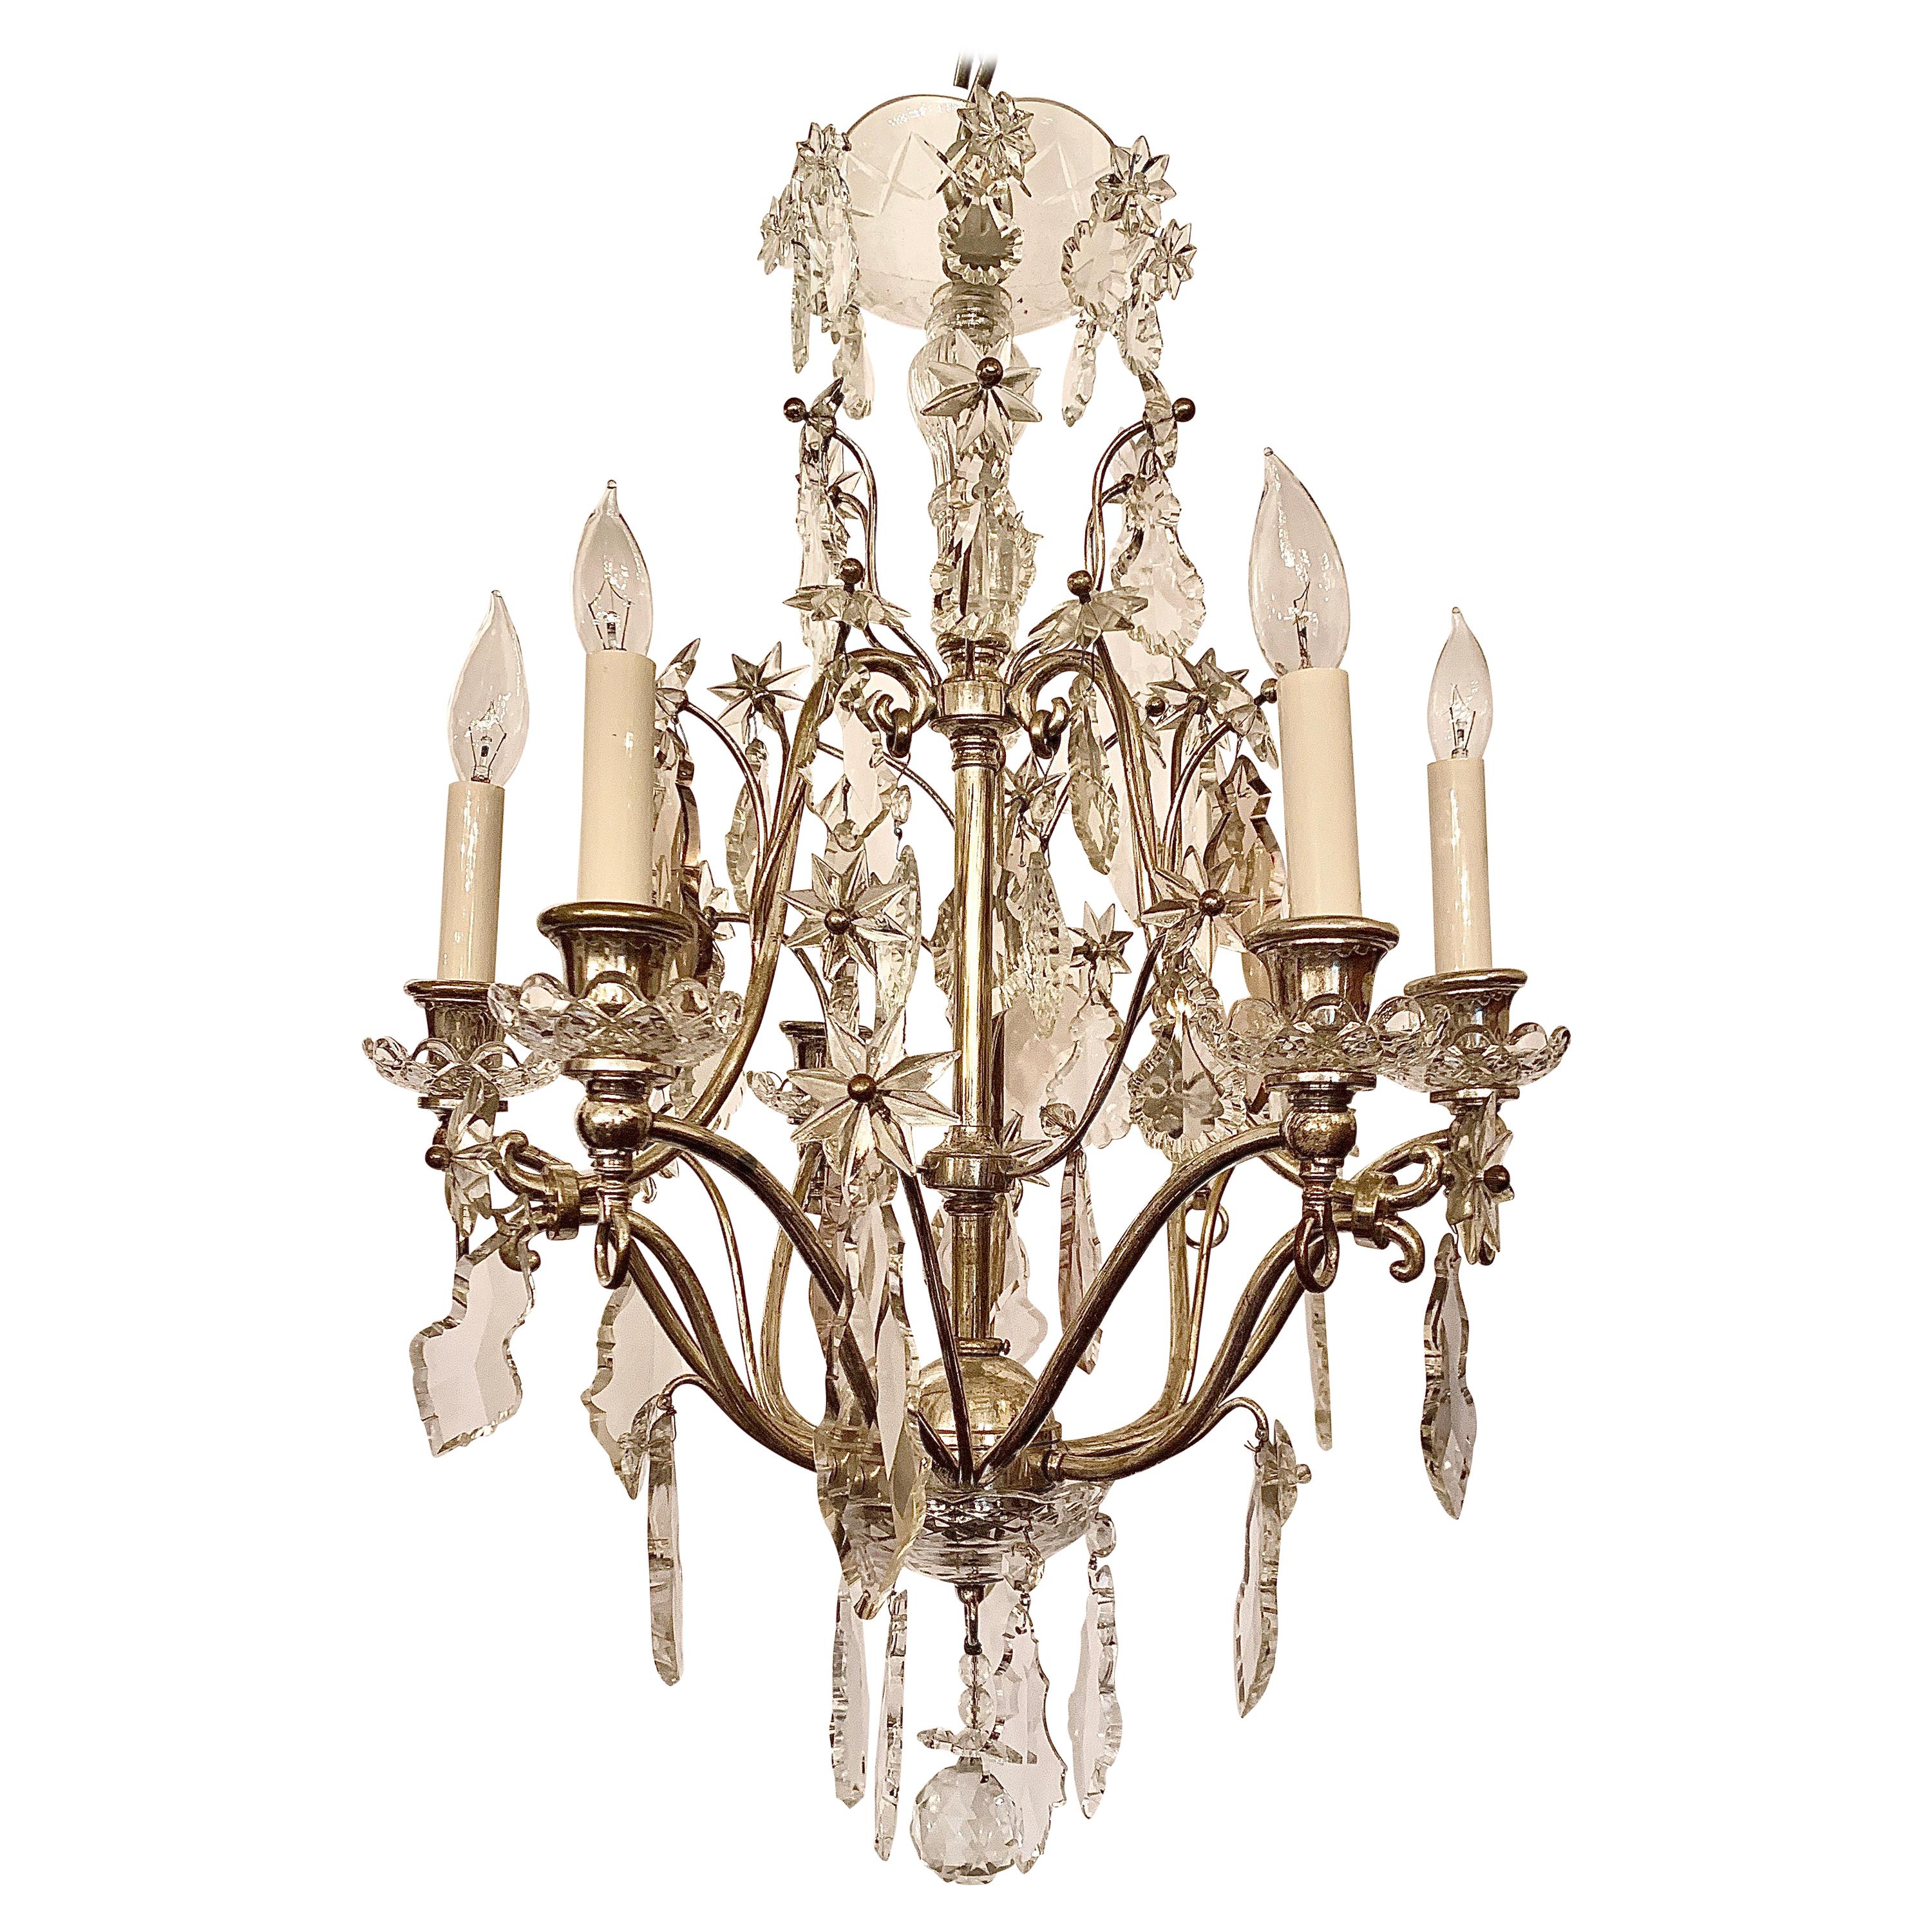 Antique French Baccarat Crystal Silvered Bronze Chandelier, Circa 1900-1920 For Sale